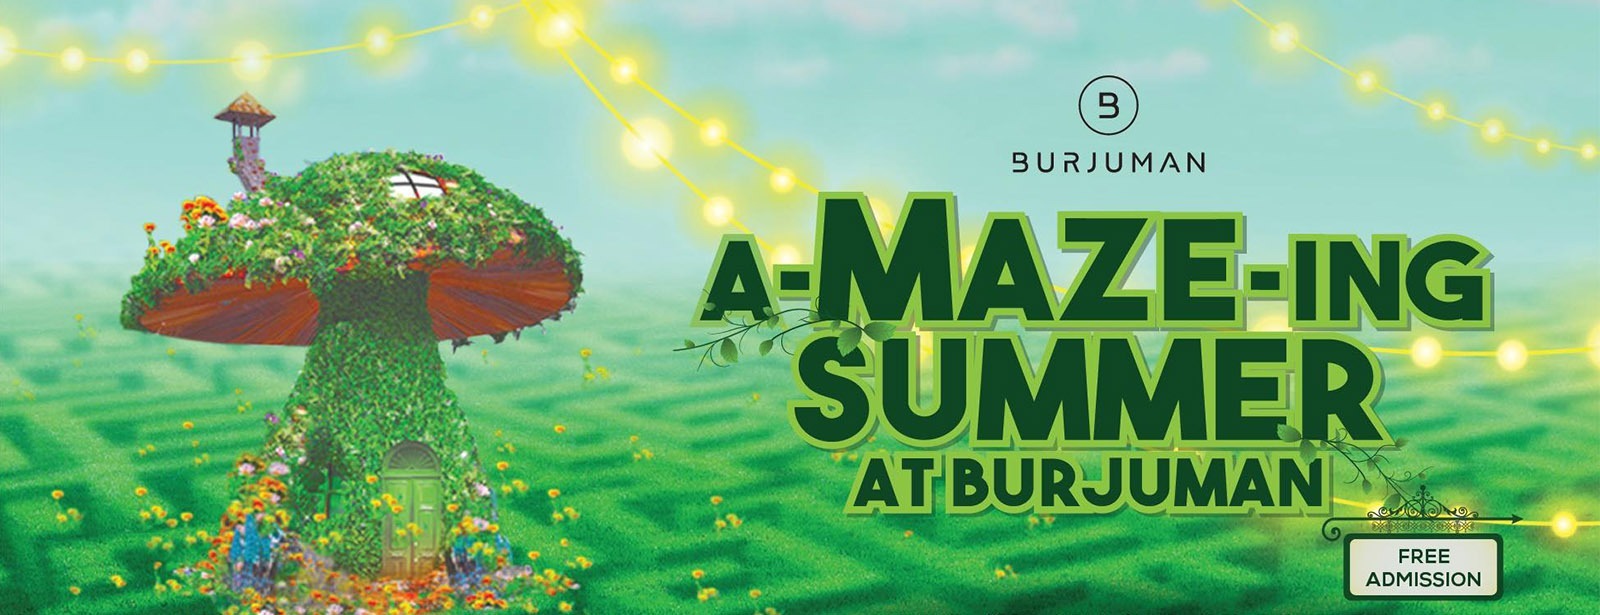 DSS: A-MAZE-ING Summer at BurJuman - Coming Soon in UAE